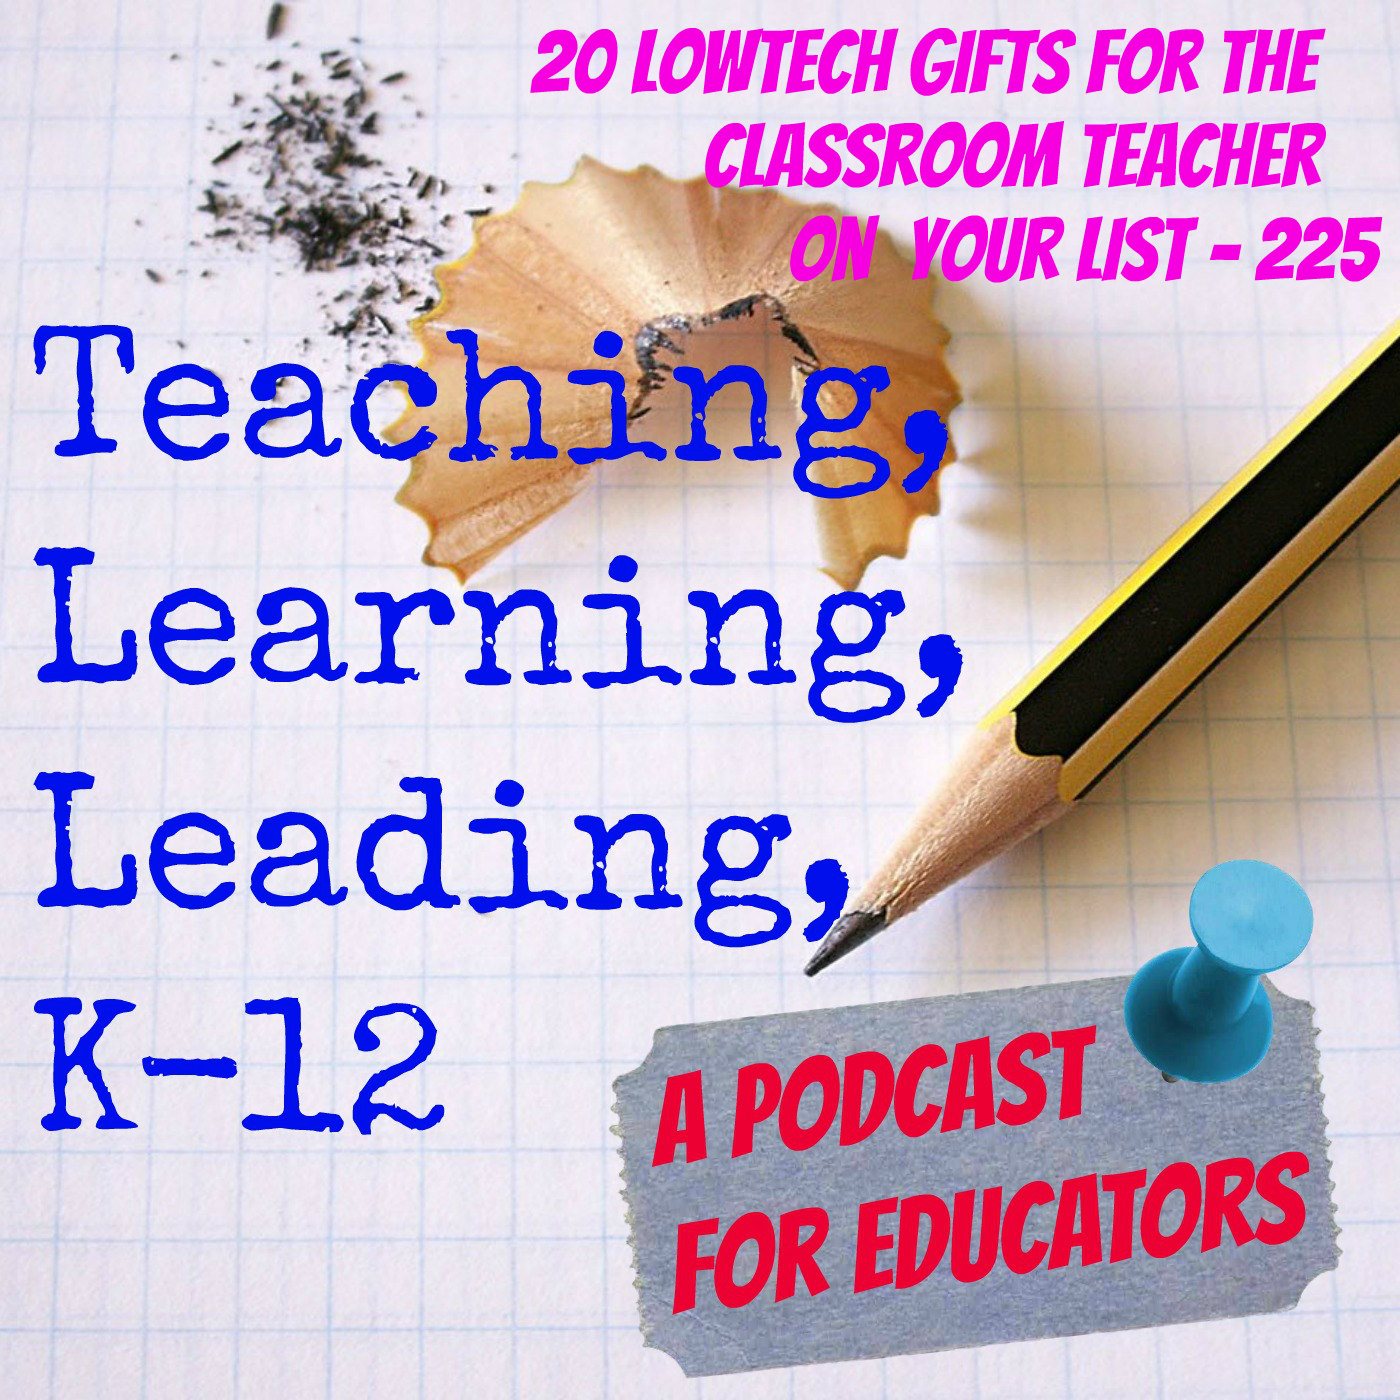 20 Low-tech Gifts for that Classroom Teacher on Your List - 225